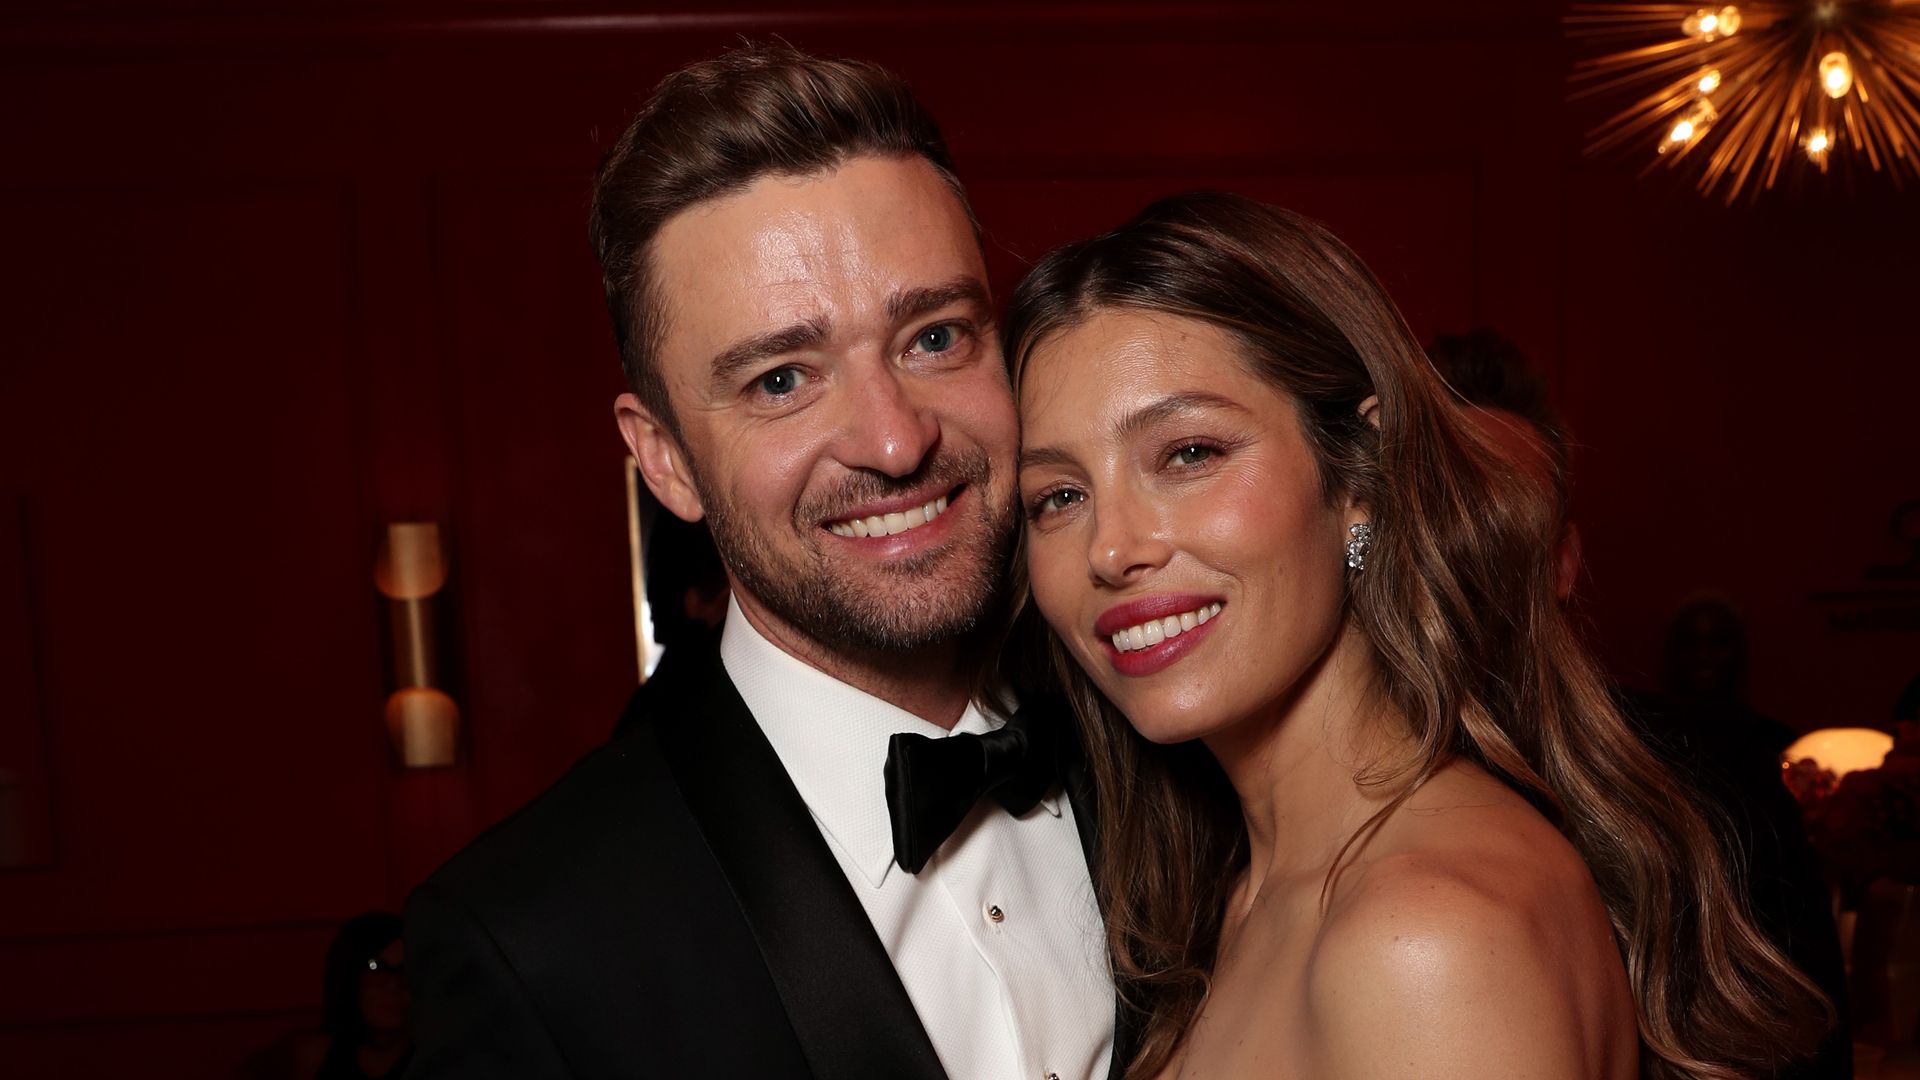 Meet Justin Timberlake and Jessica Biel's rarely-seen kids – adorable photos of their sons